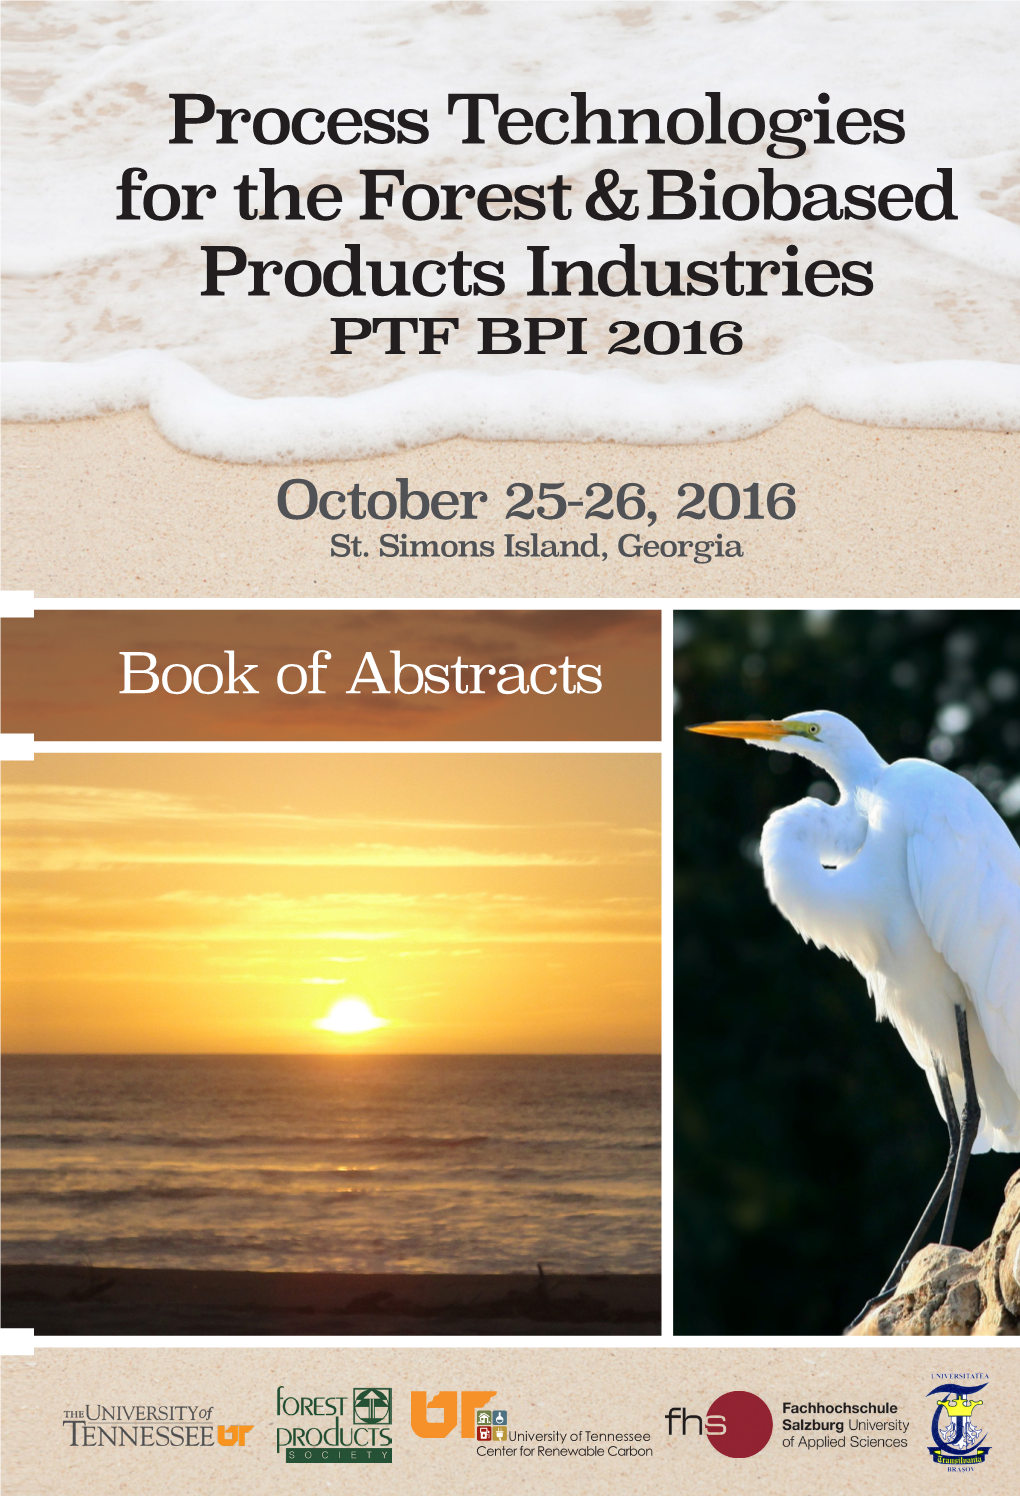 Process Technologies for the Forest & Biobased Products Industries P